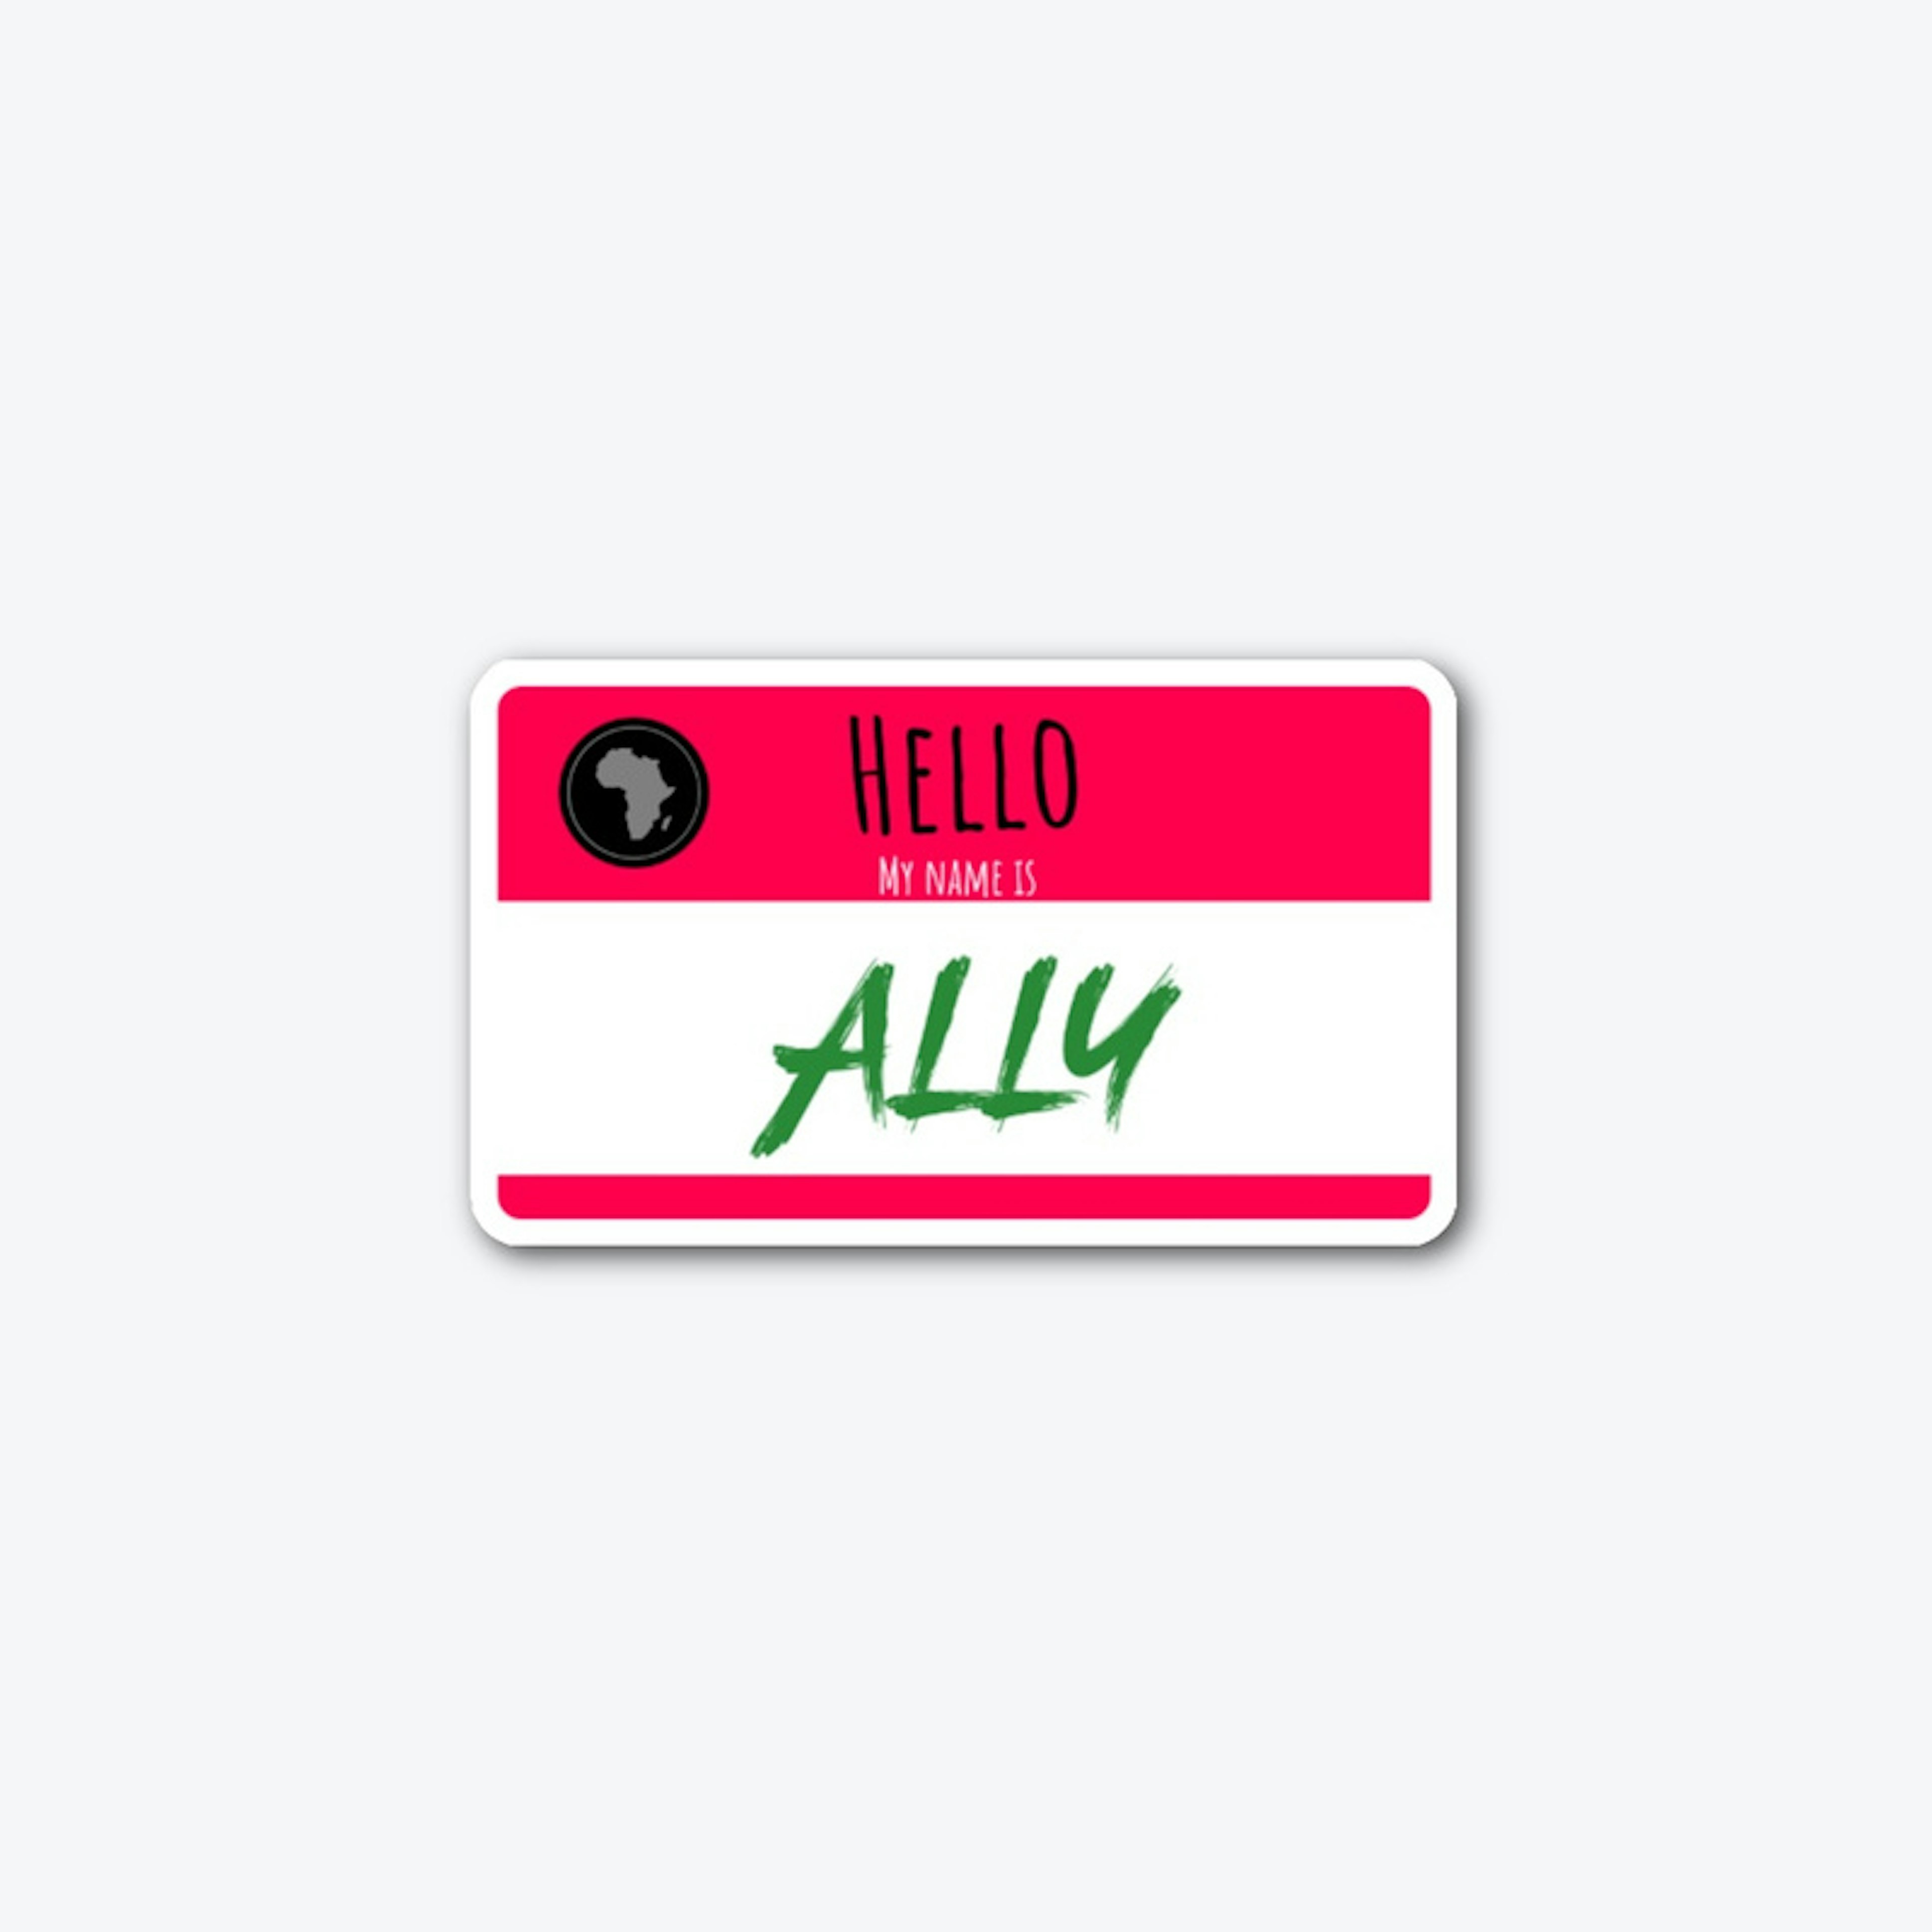 Hello, my name is Ally. 